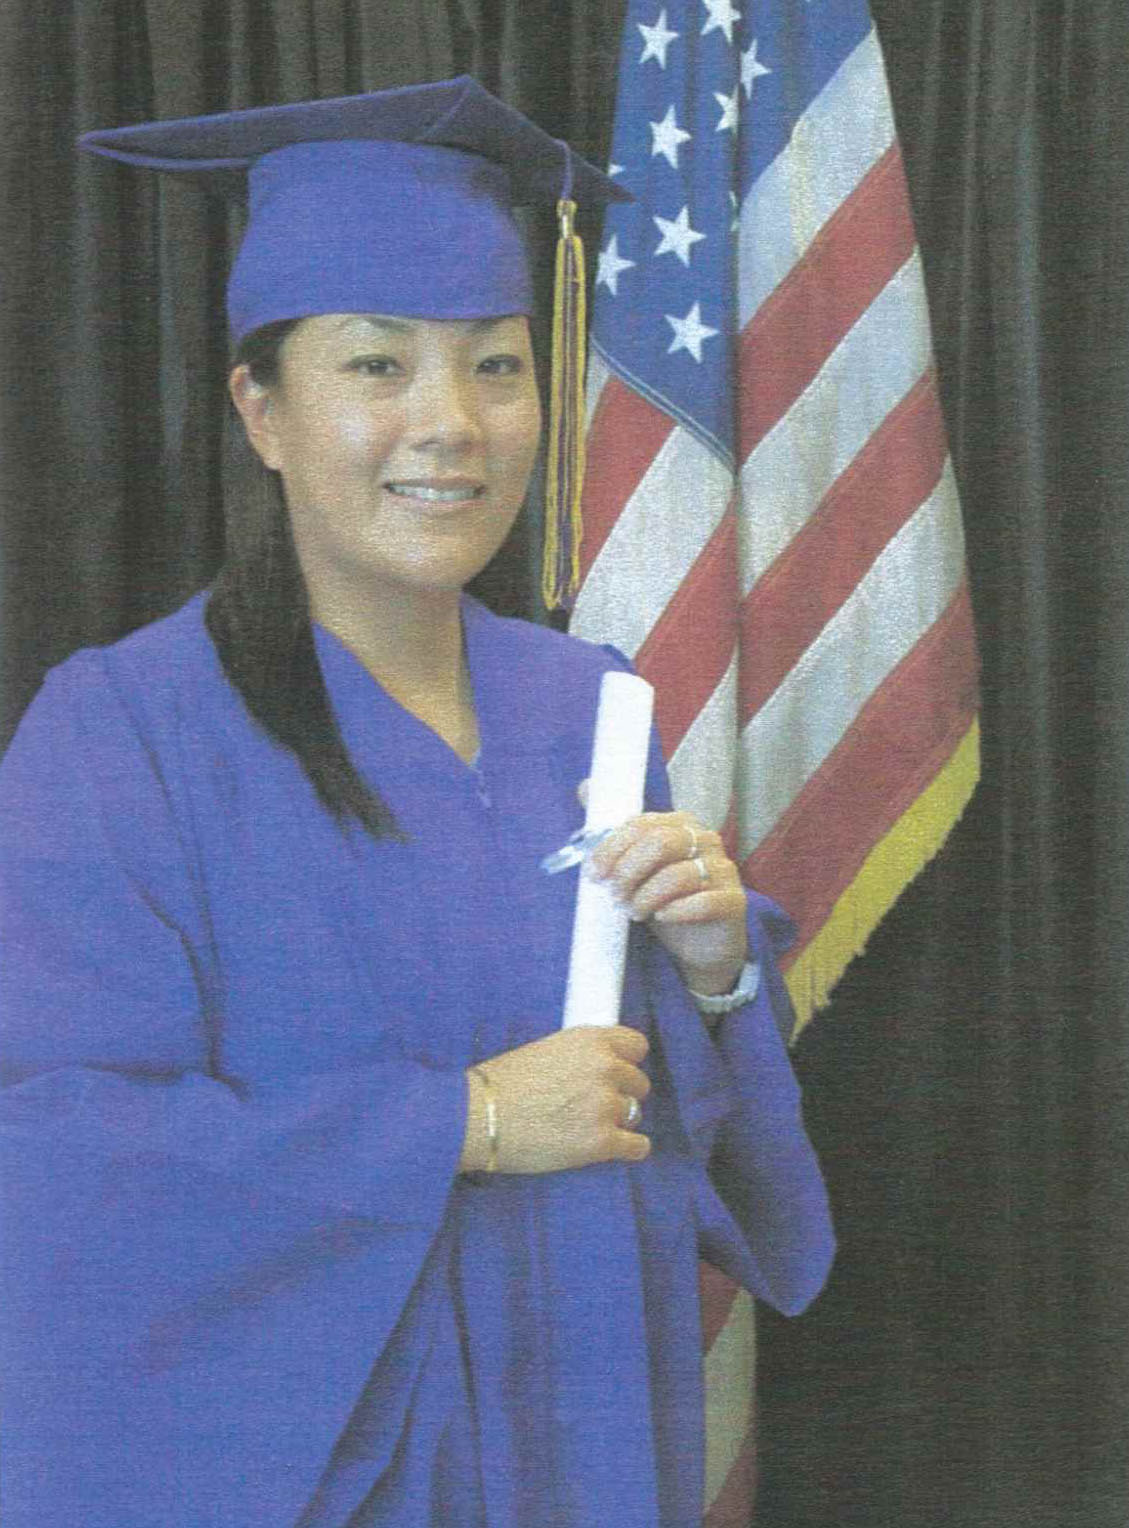 Tien Hsiang Mo graduates from Feather River College, Central California Women’s Facility, in 2018.